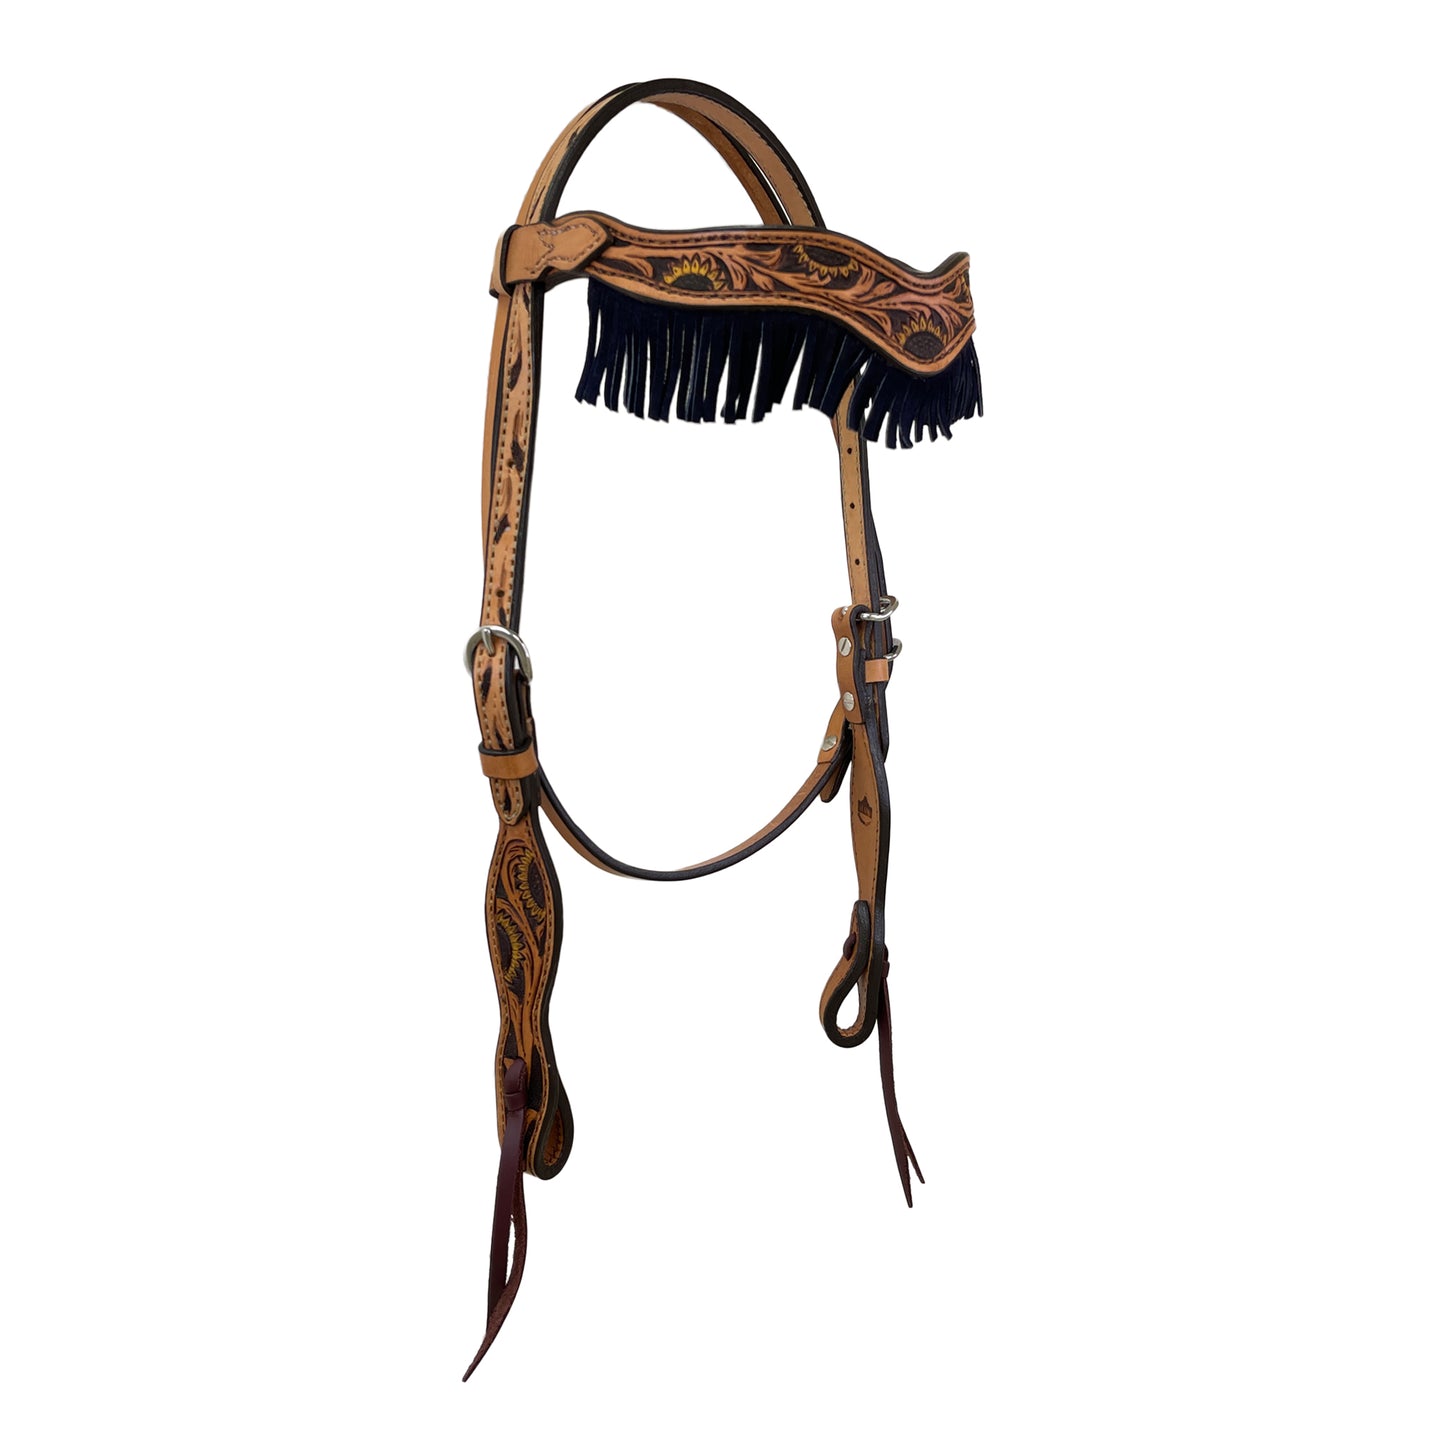 2F17-SUN 1-1/2" Wave browband headstall golden leather sunflower tooling with background paint and fringe